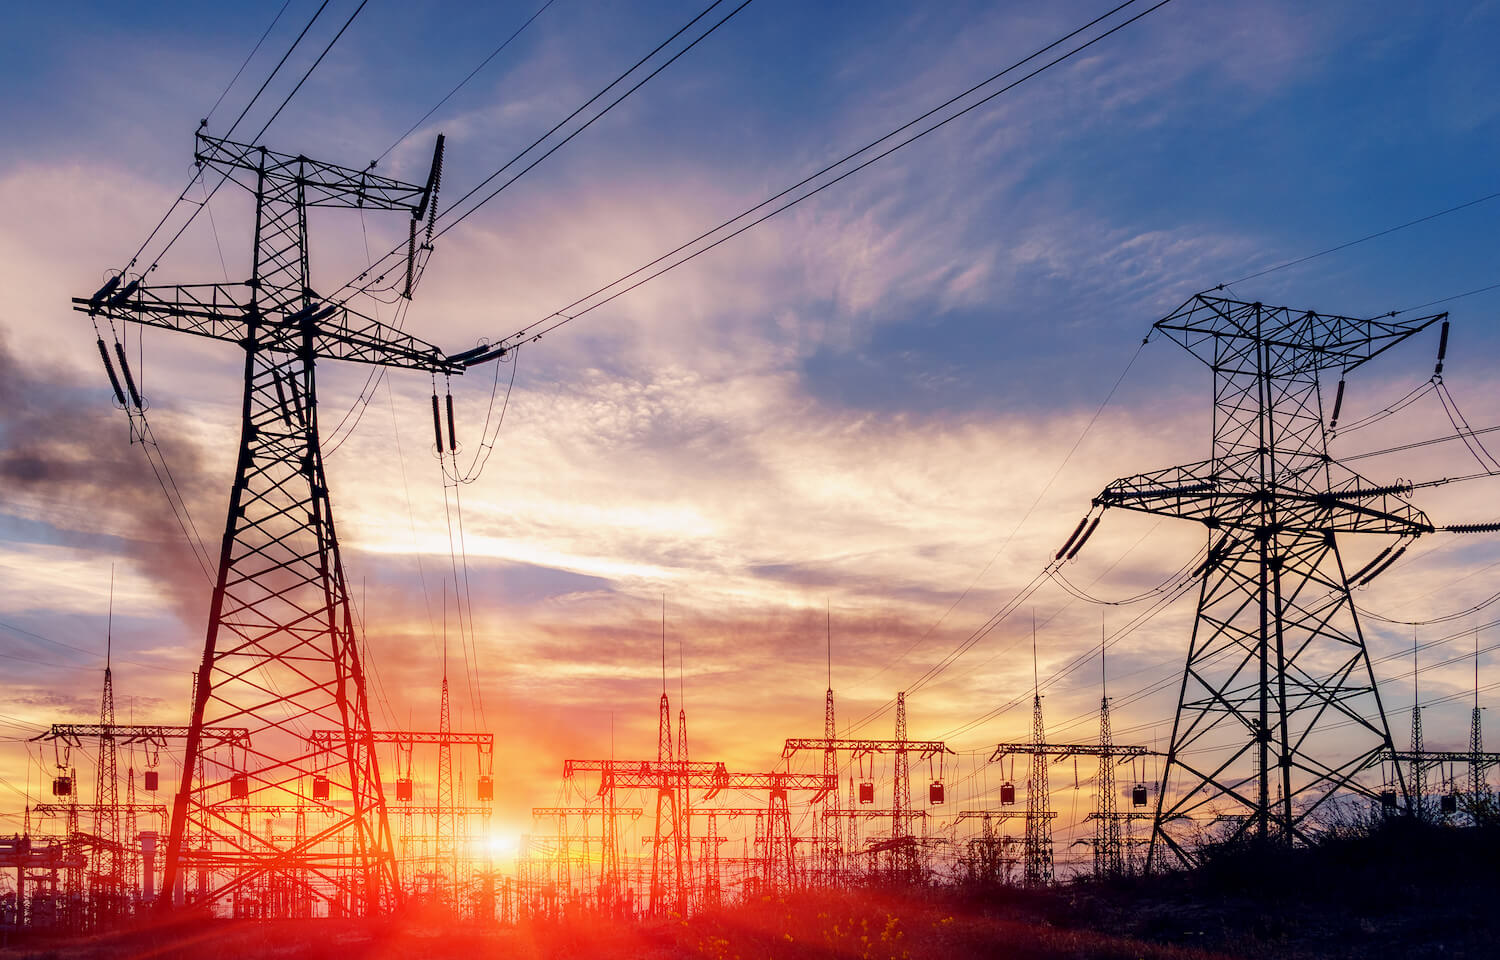 distribution-electric-substation-with-power-lines-transformers